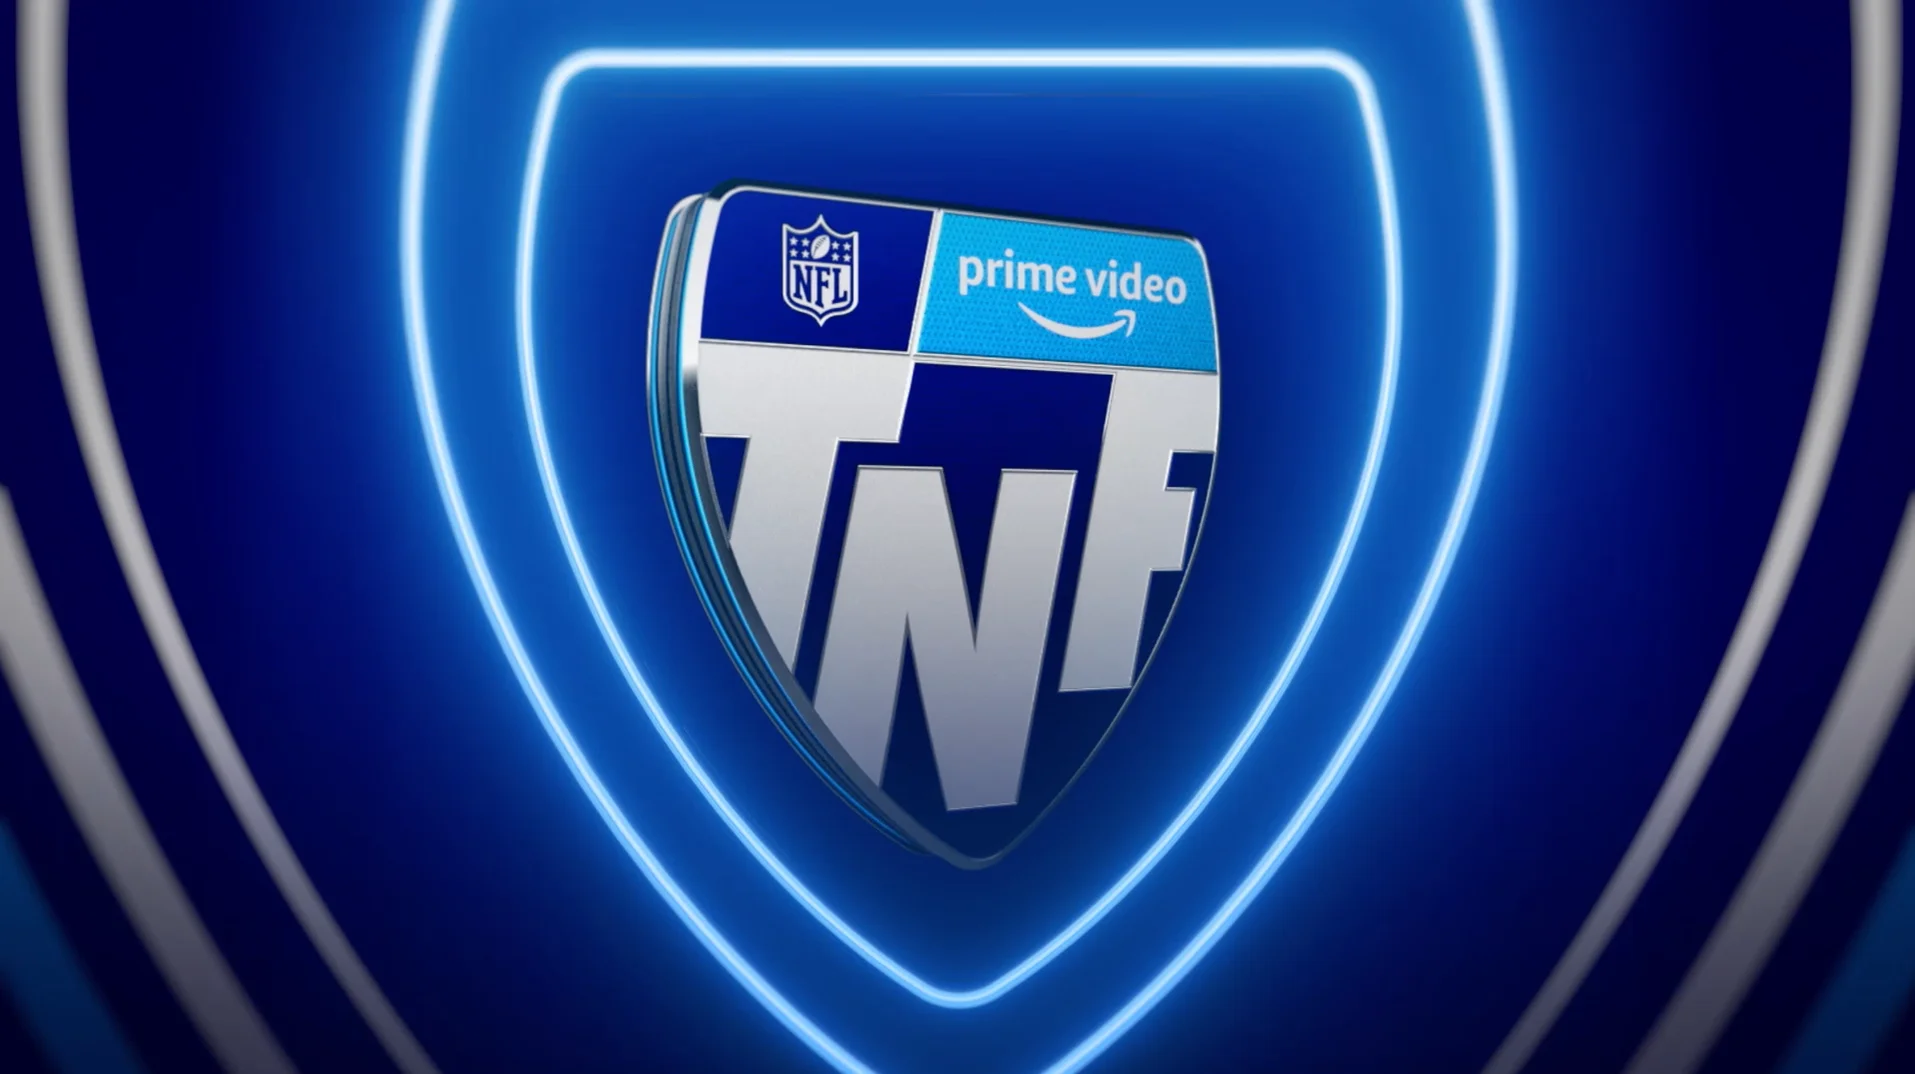 amazon prime video and nfl